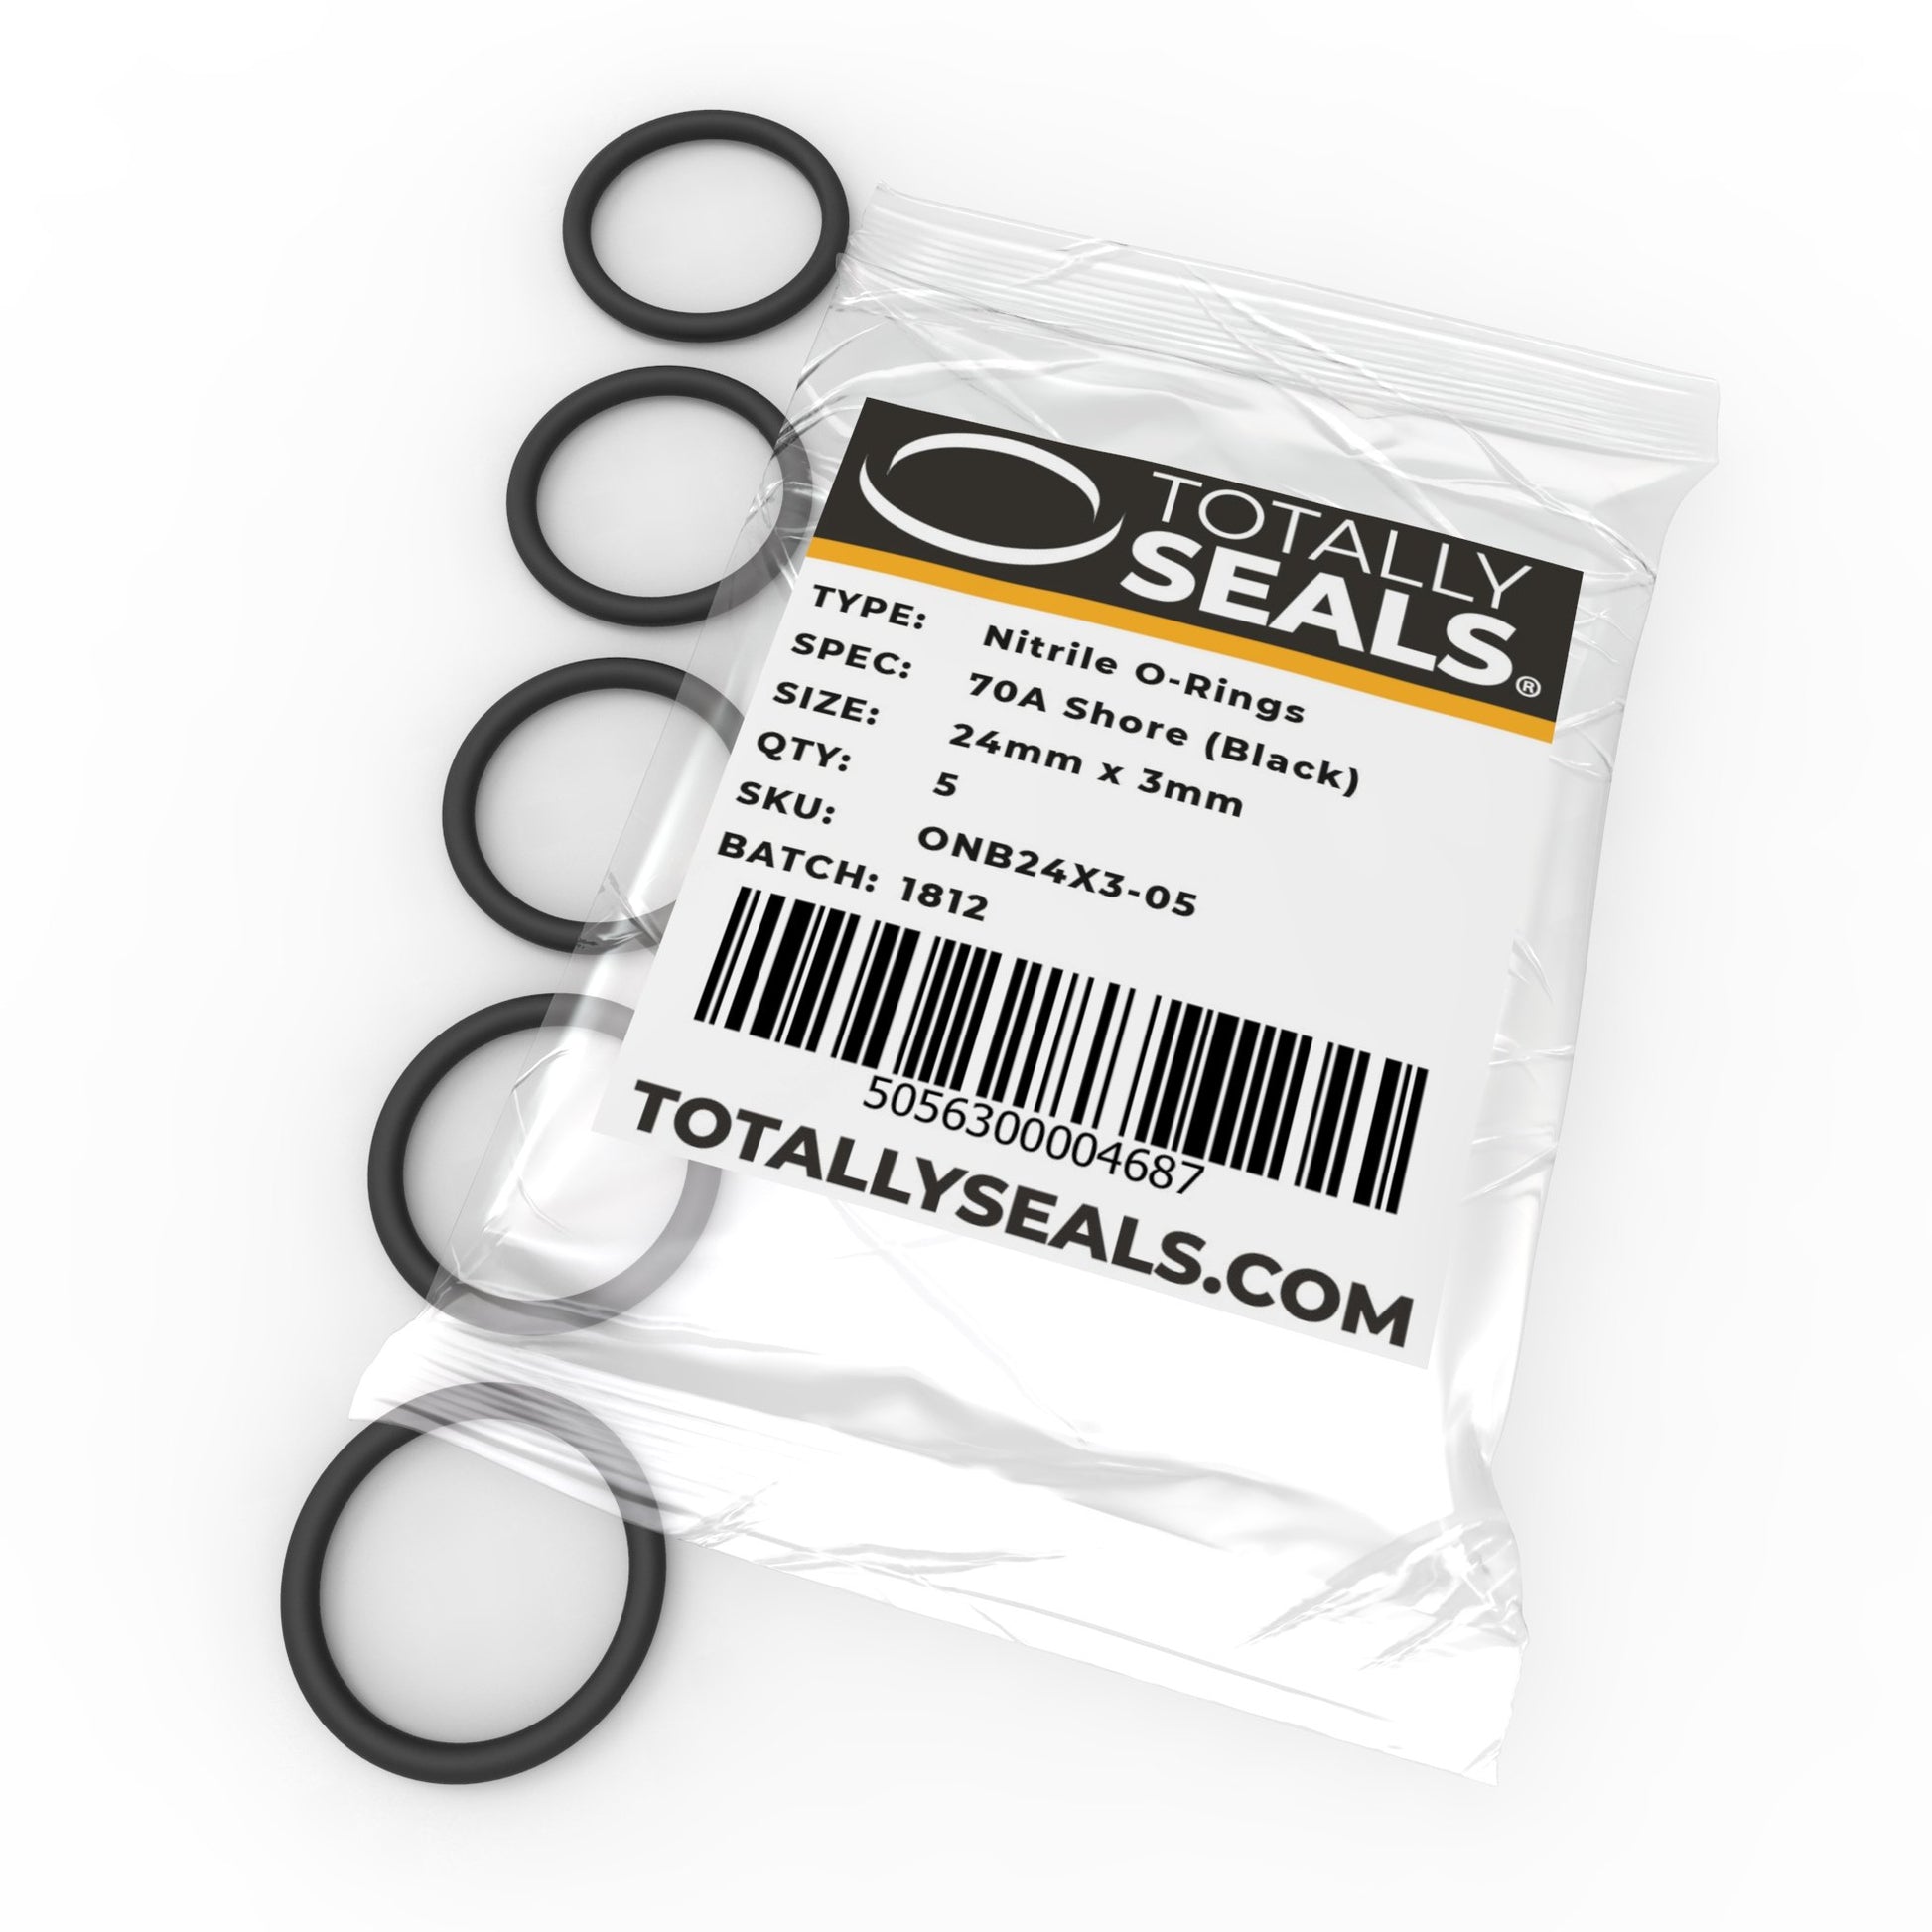 24mm x 3mm (30mm OD) Nitrile O-Rings - Totally Seals®